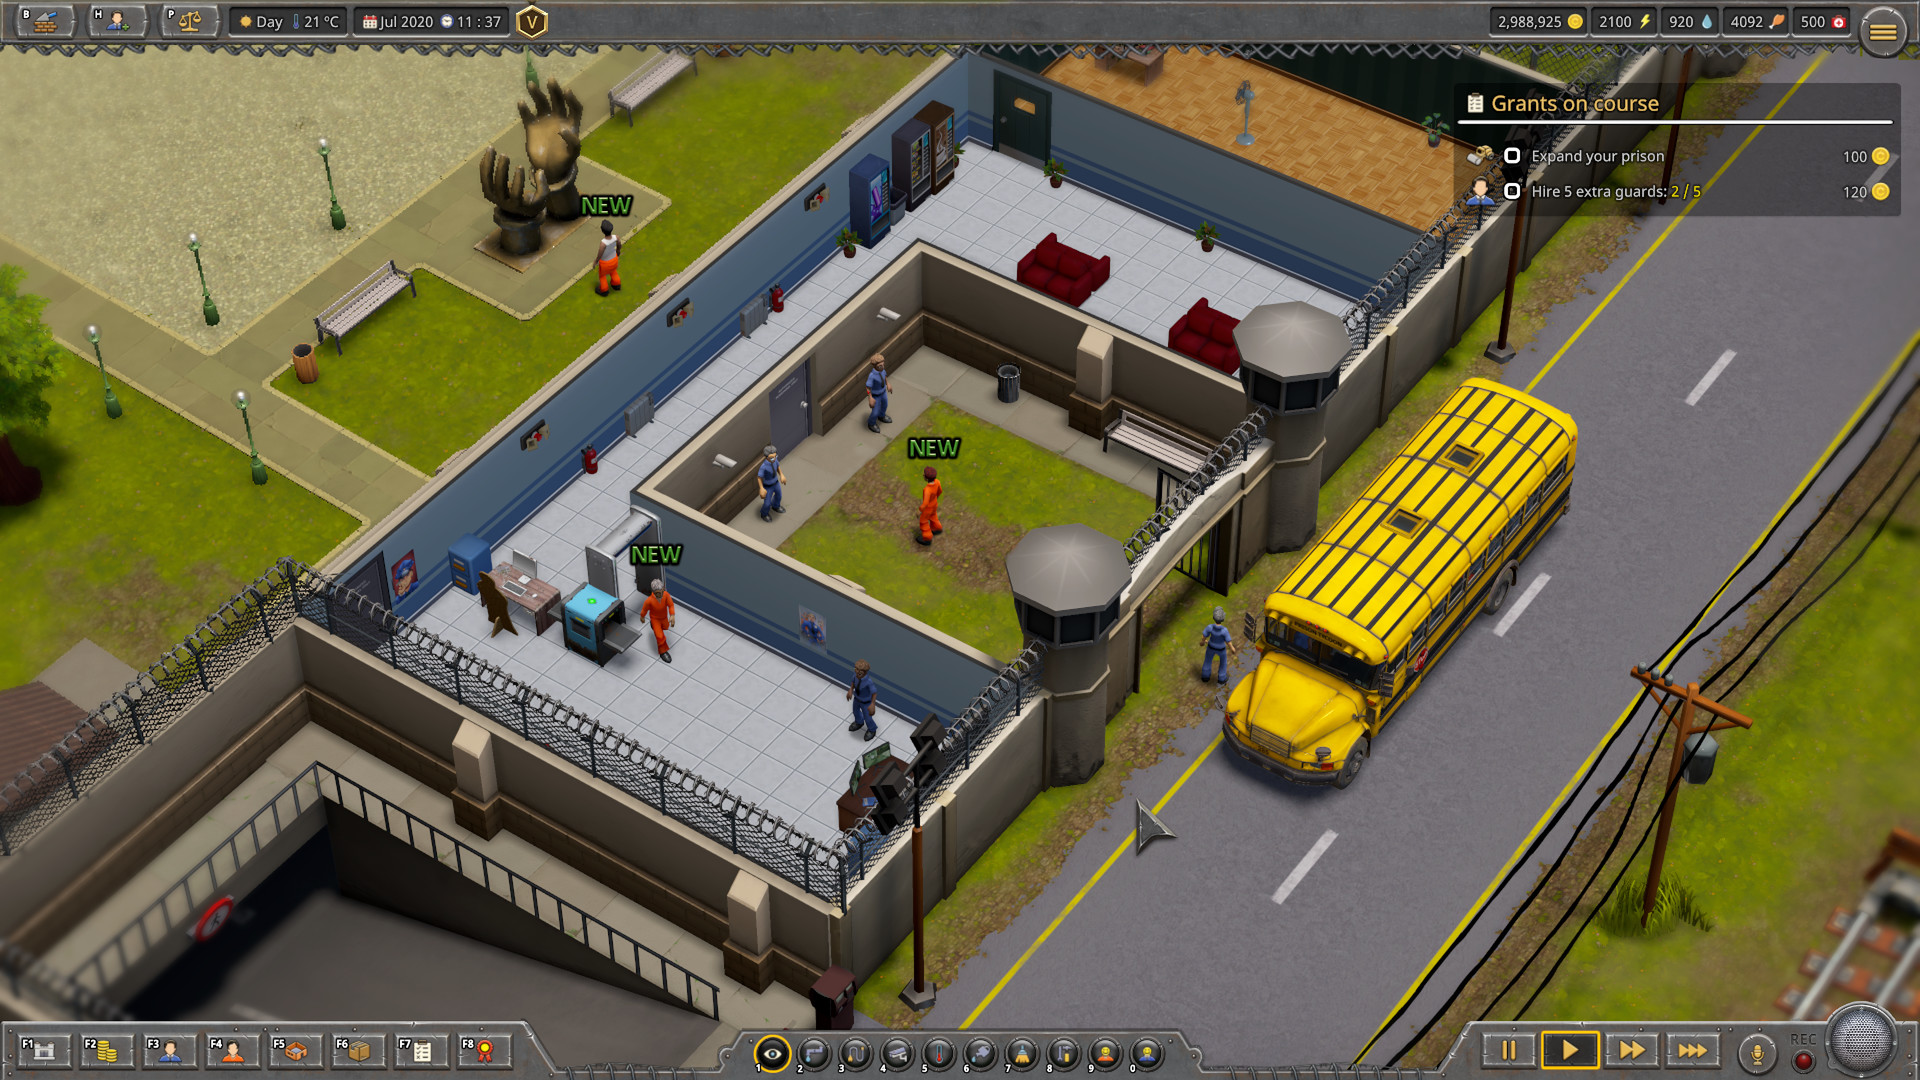 Camp tycoon. Prison Tycoon 2021. Prison Tycoon 5. Prison Tycoon 7. Prison Tycoon 6.